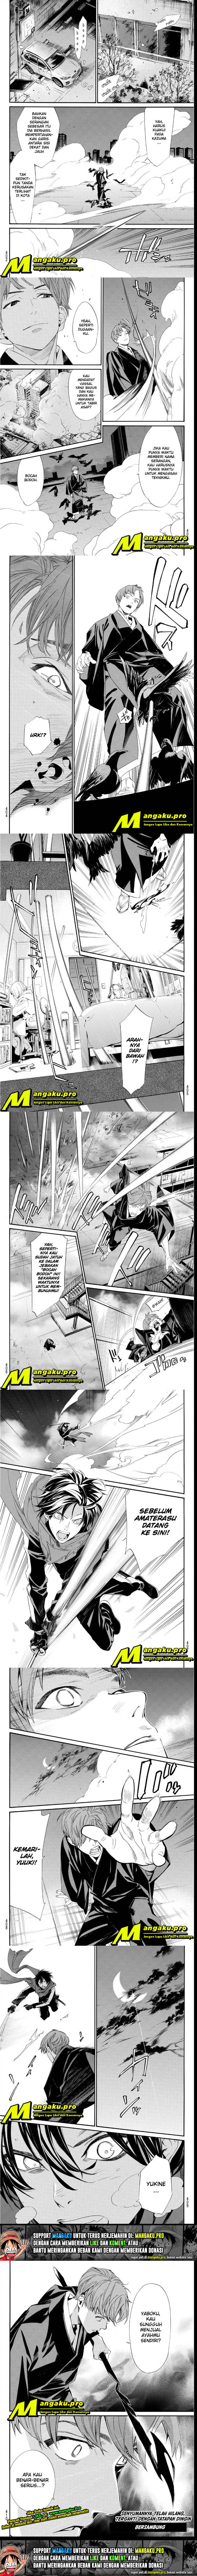 Noragami Chapter 92.2